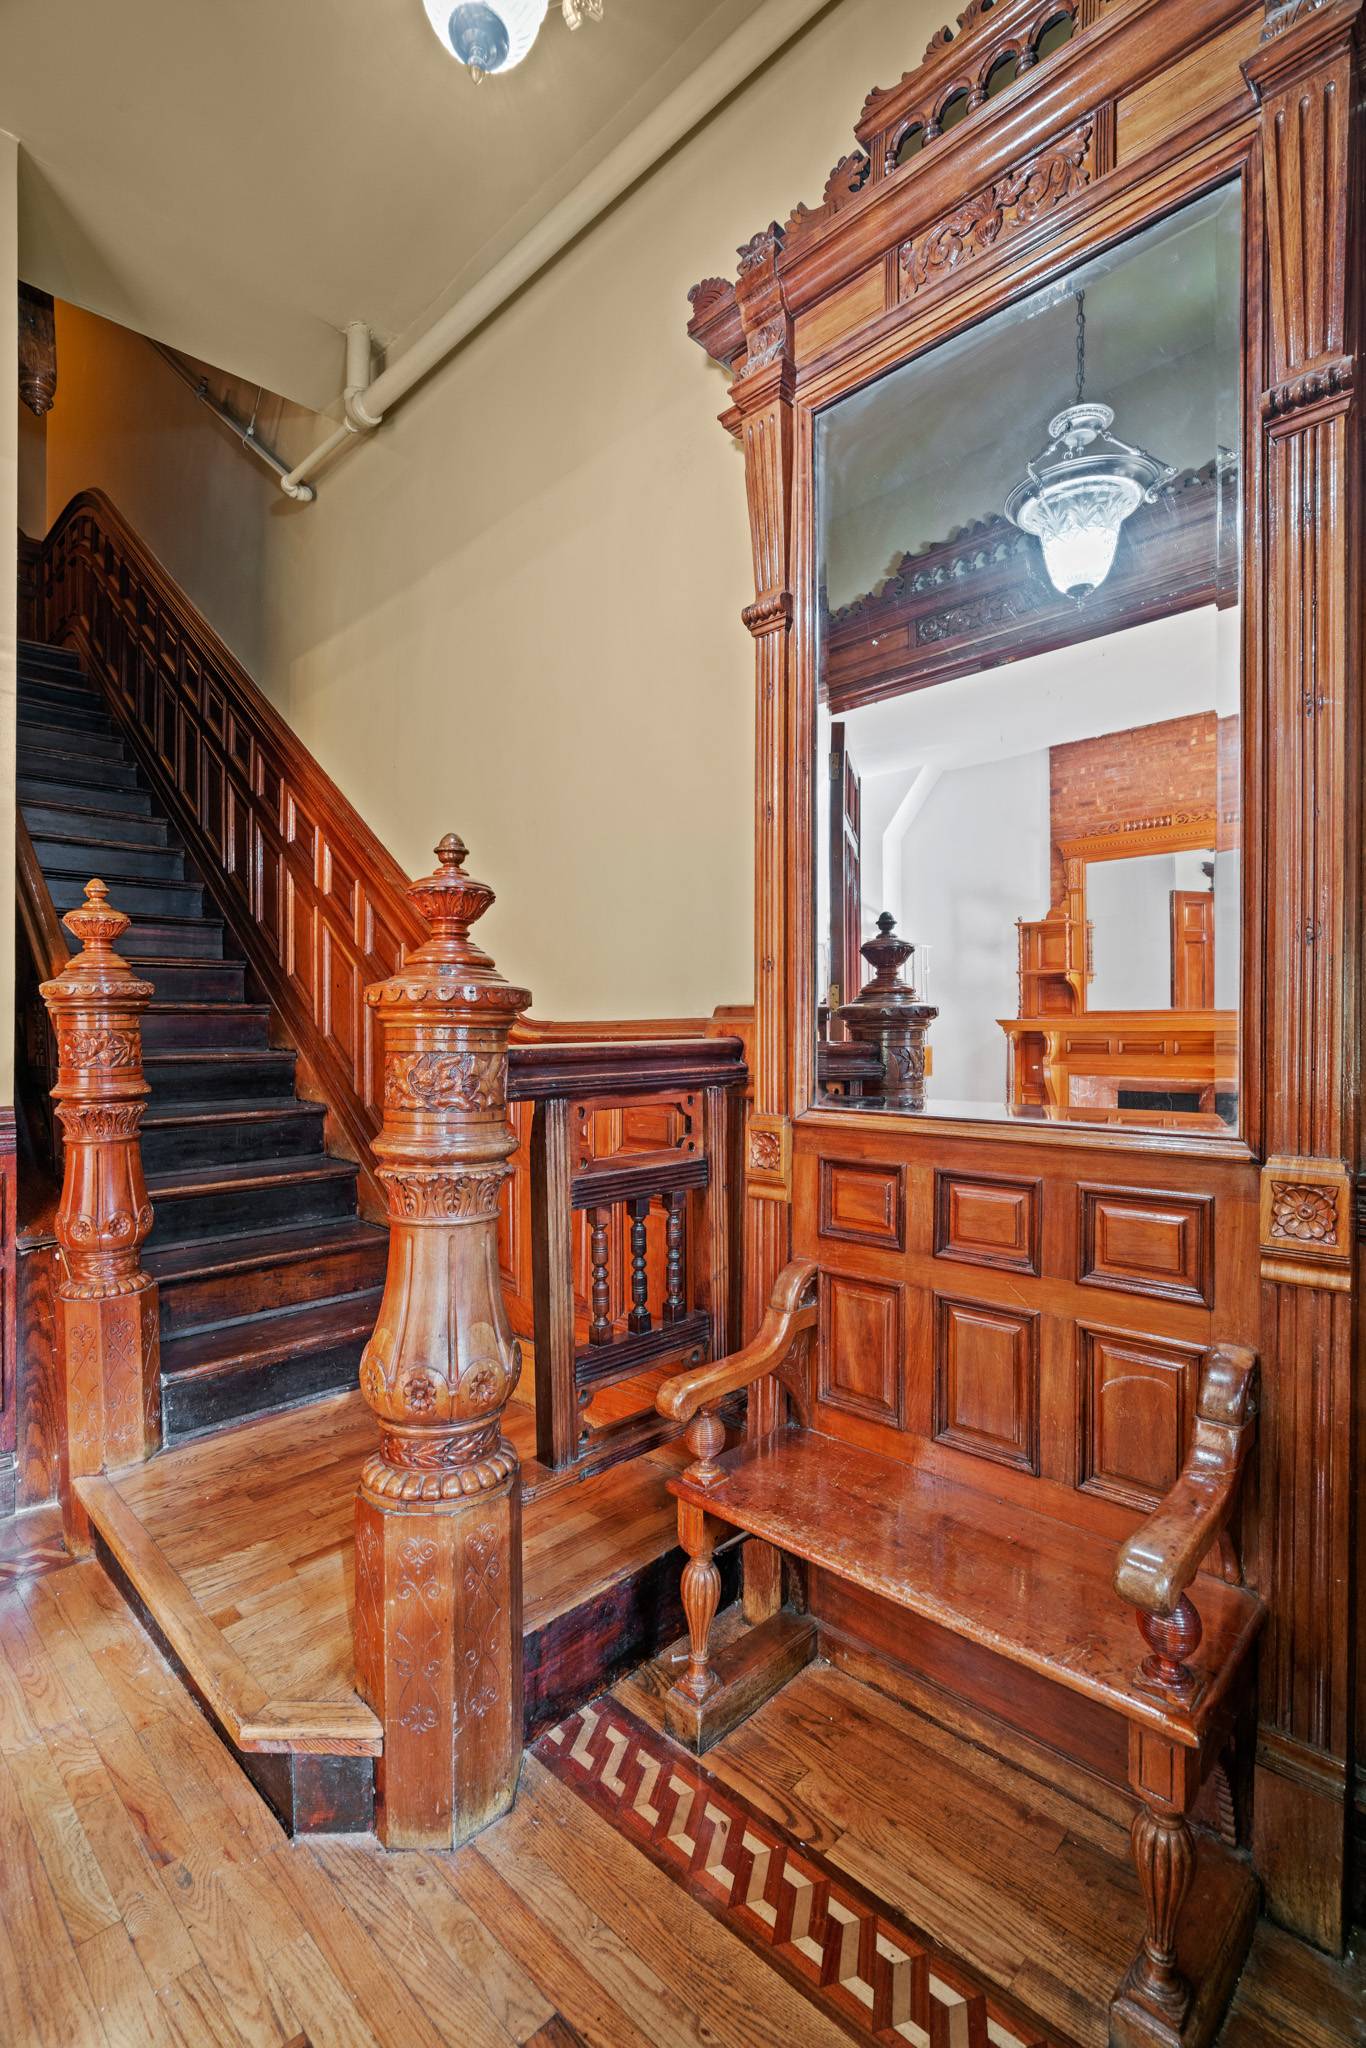 Four-family brownstone, meticulously restored, offers a versatile range of possibilities